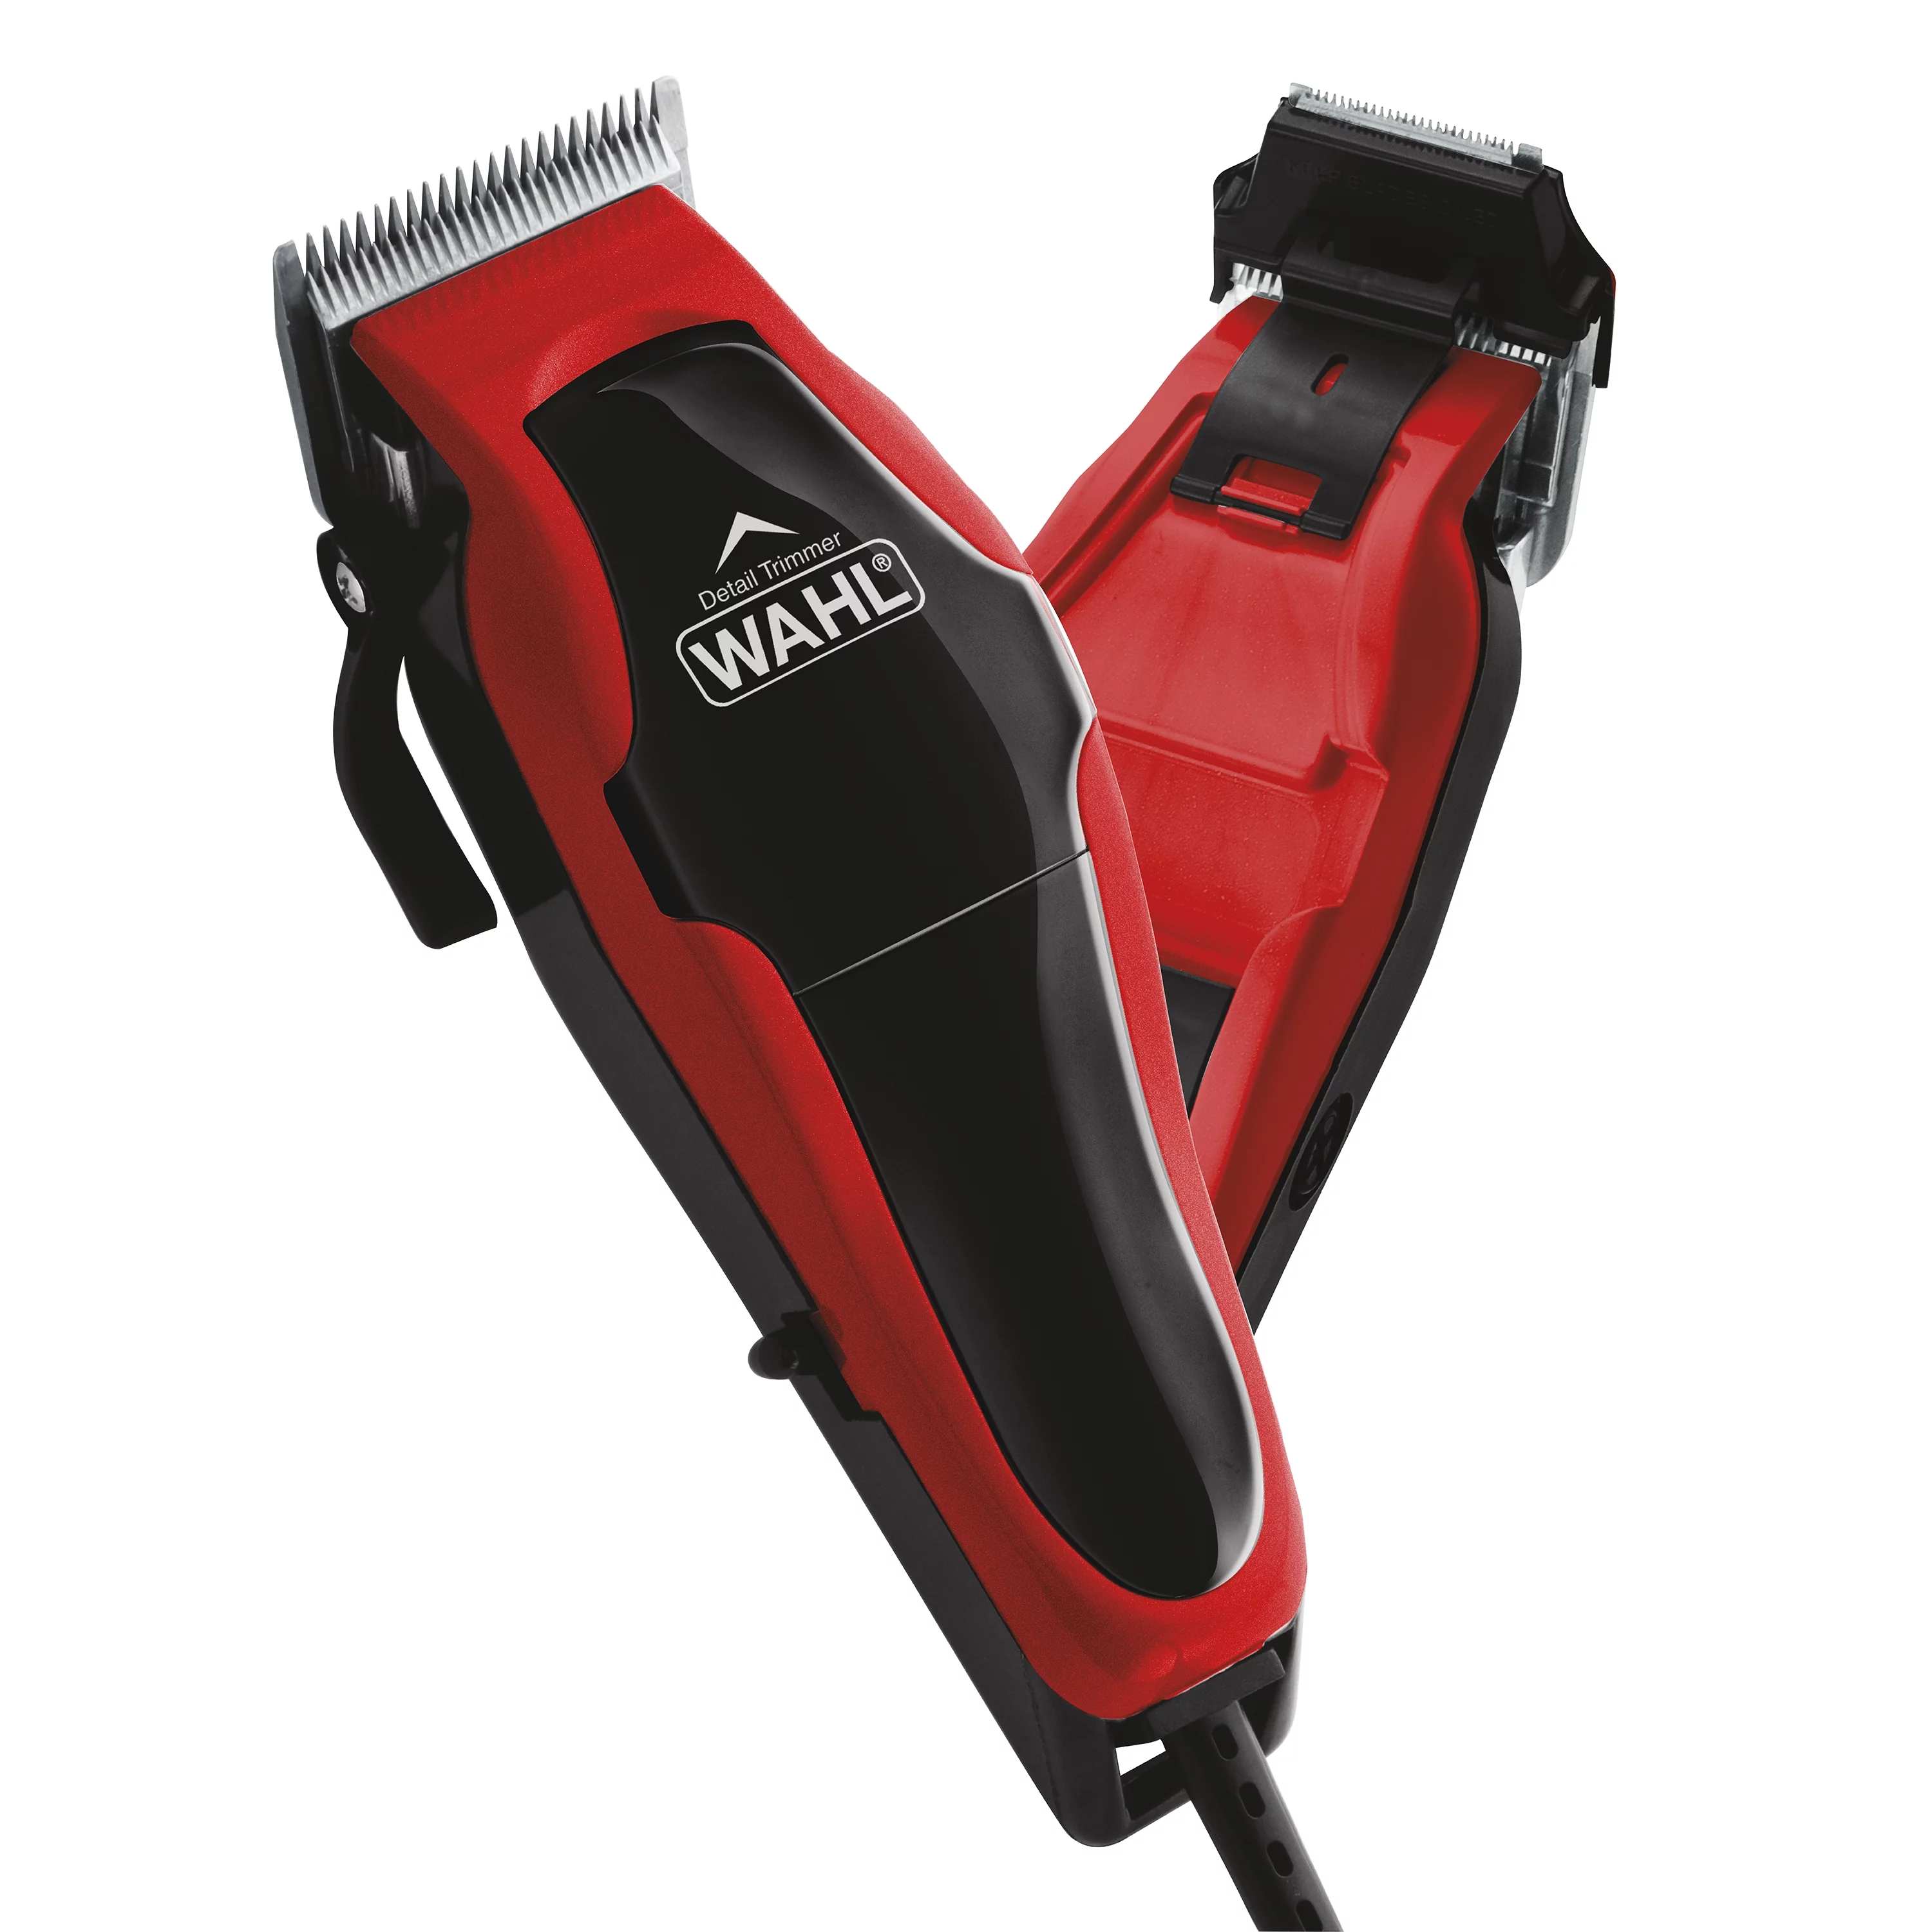 Wahl Clipper Clip 'N Trim 2 in 1 Hair Cutting Corded Clipper/Trimmer for Men and Women Kit  #79900-1501